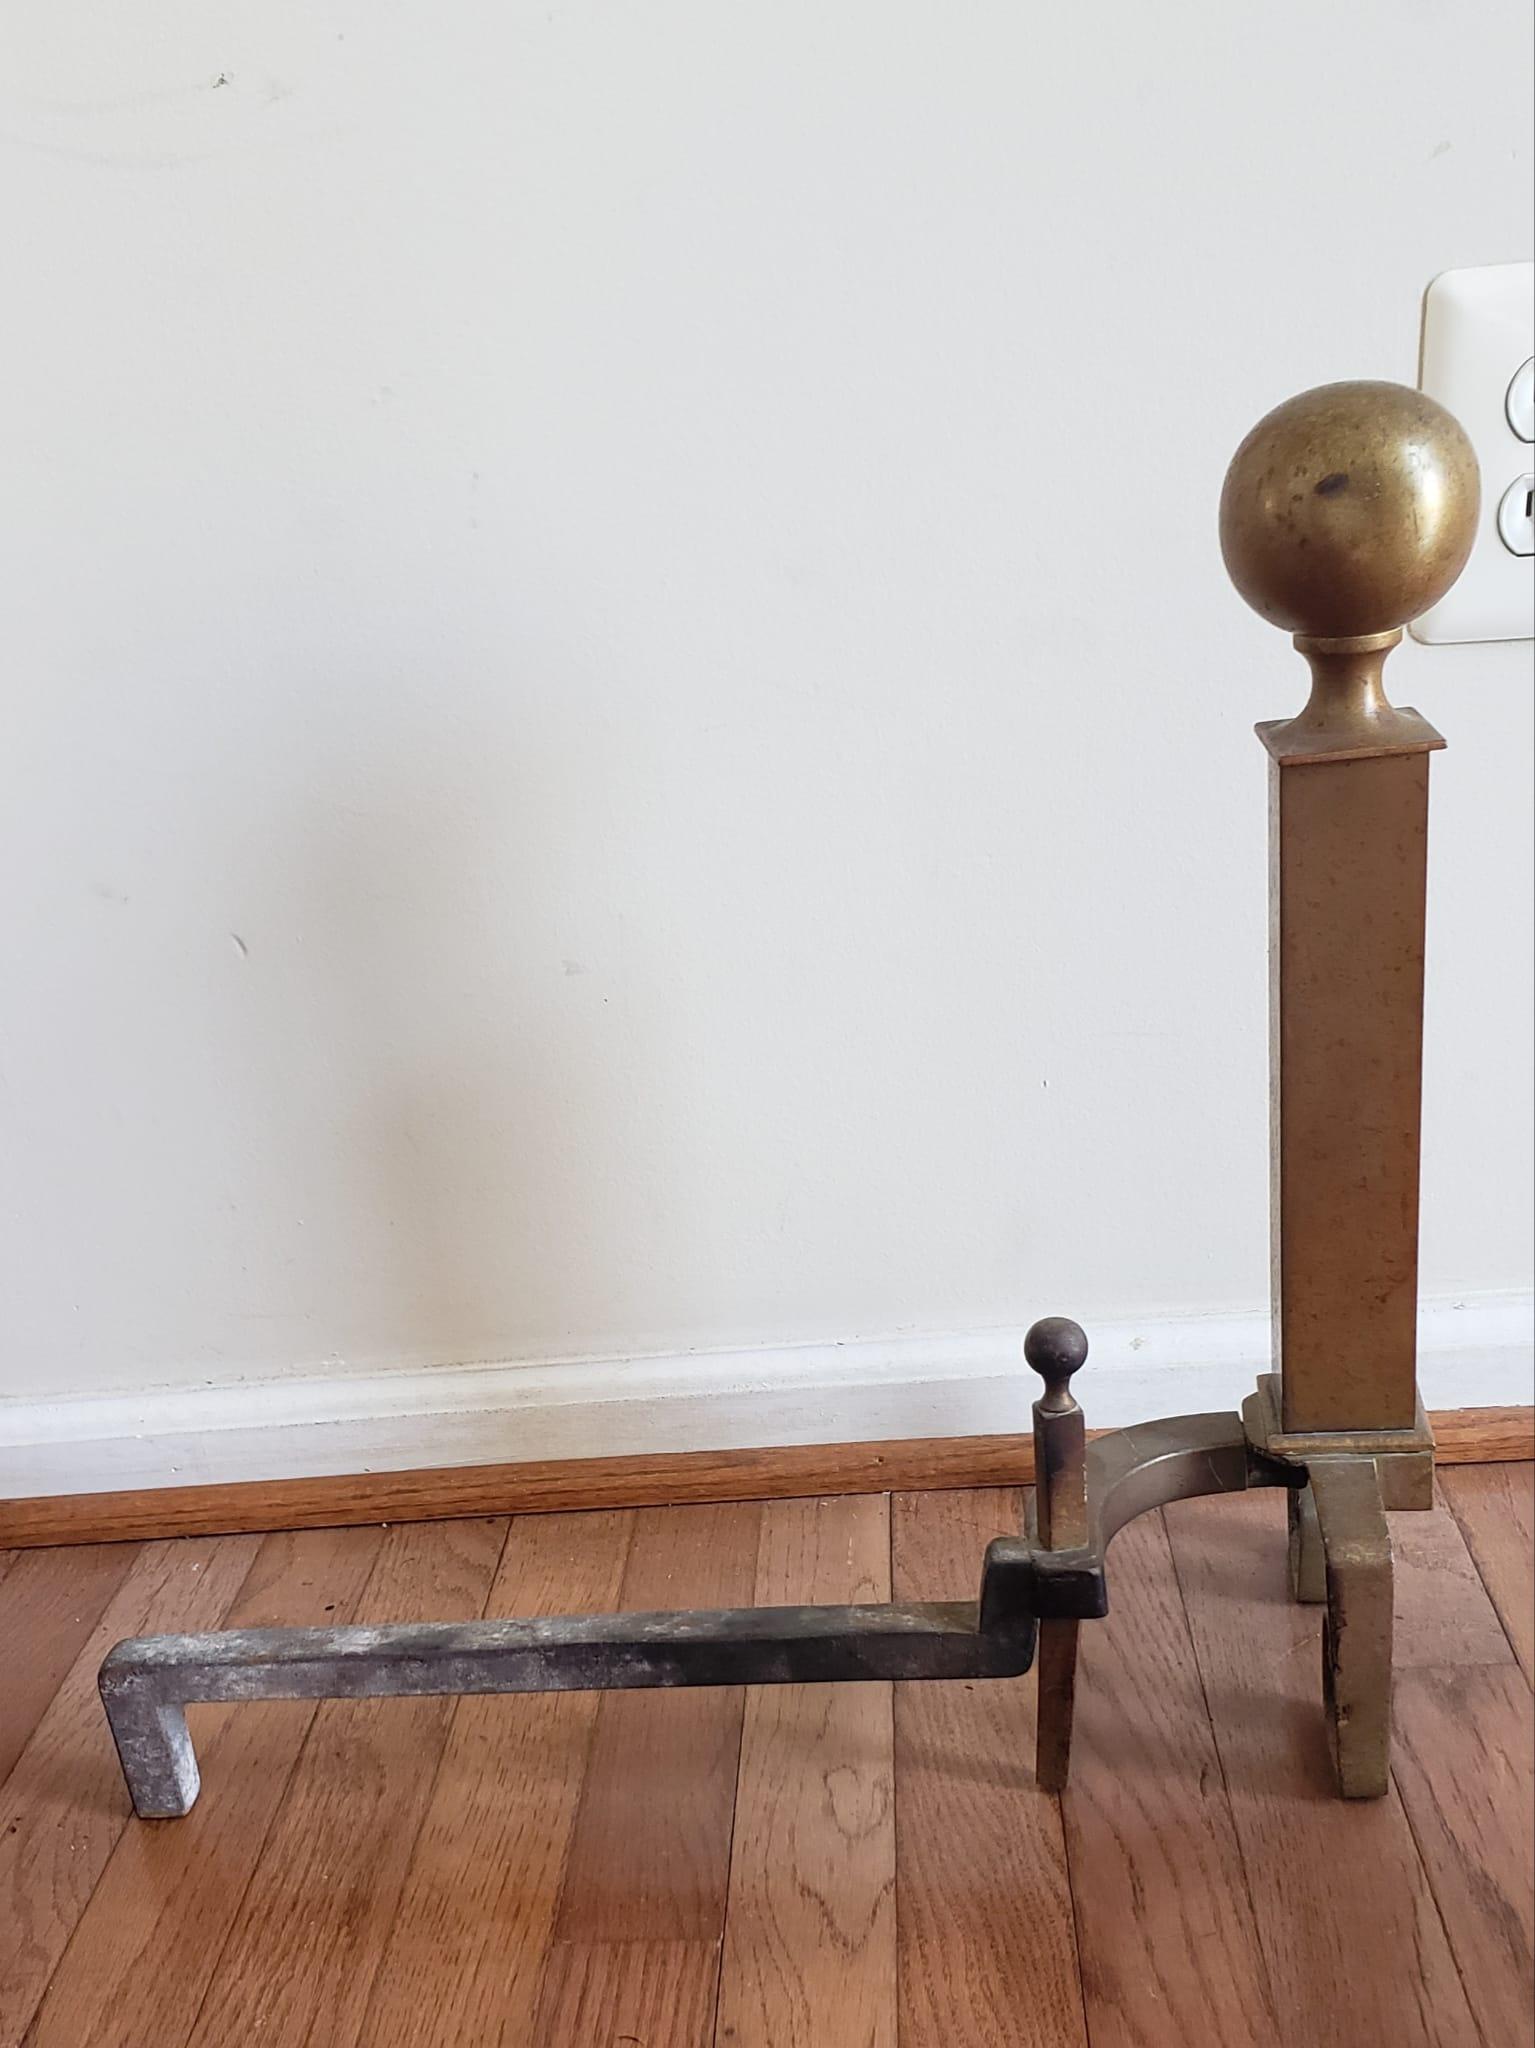 Pair of Early 20th Century Art Deco Brass Andirons In Good Condition For Sale In Germantown, MD